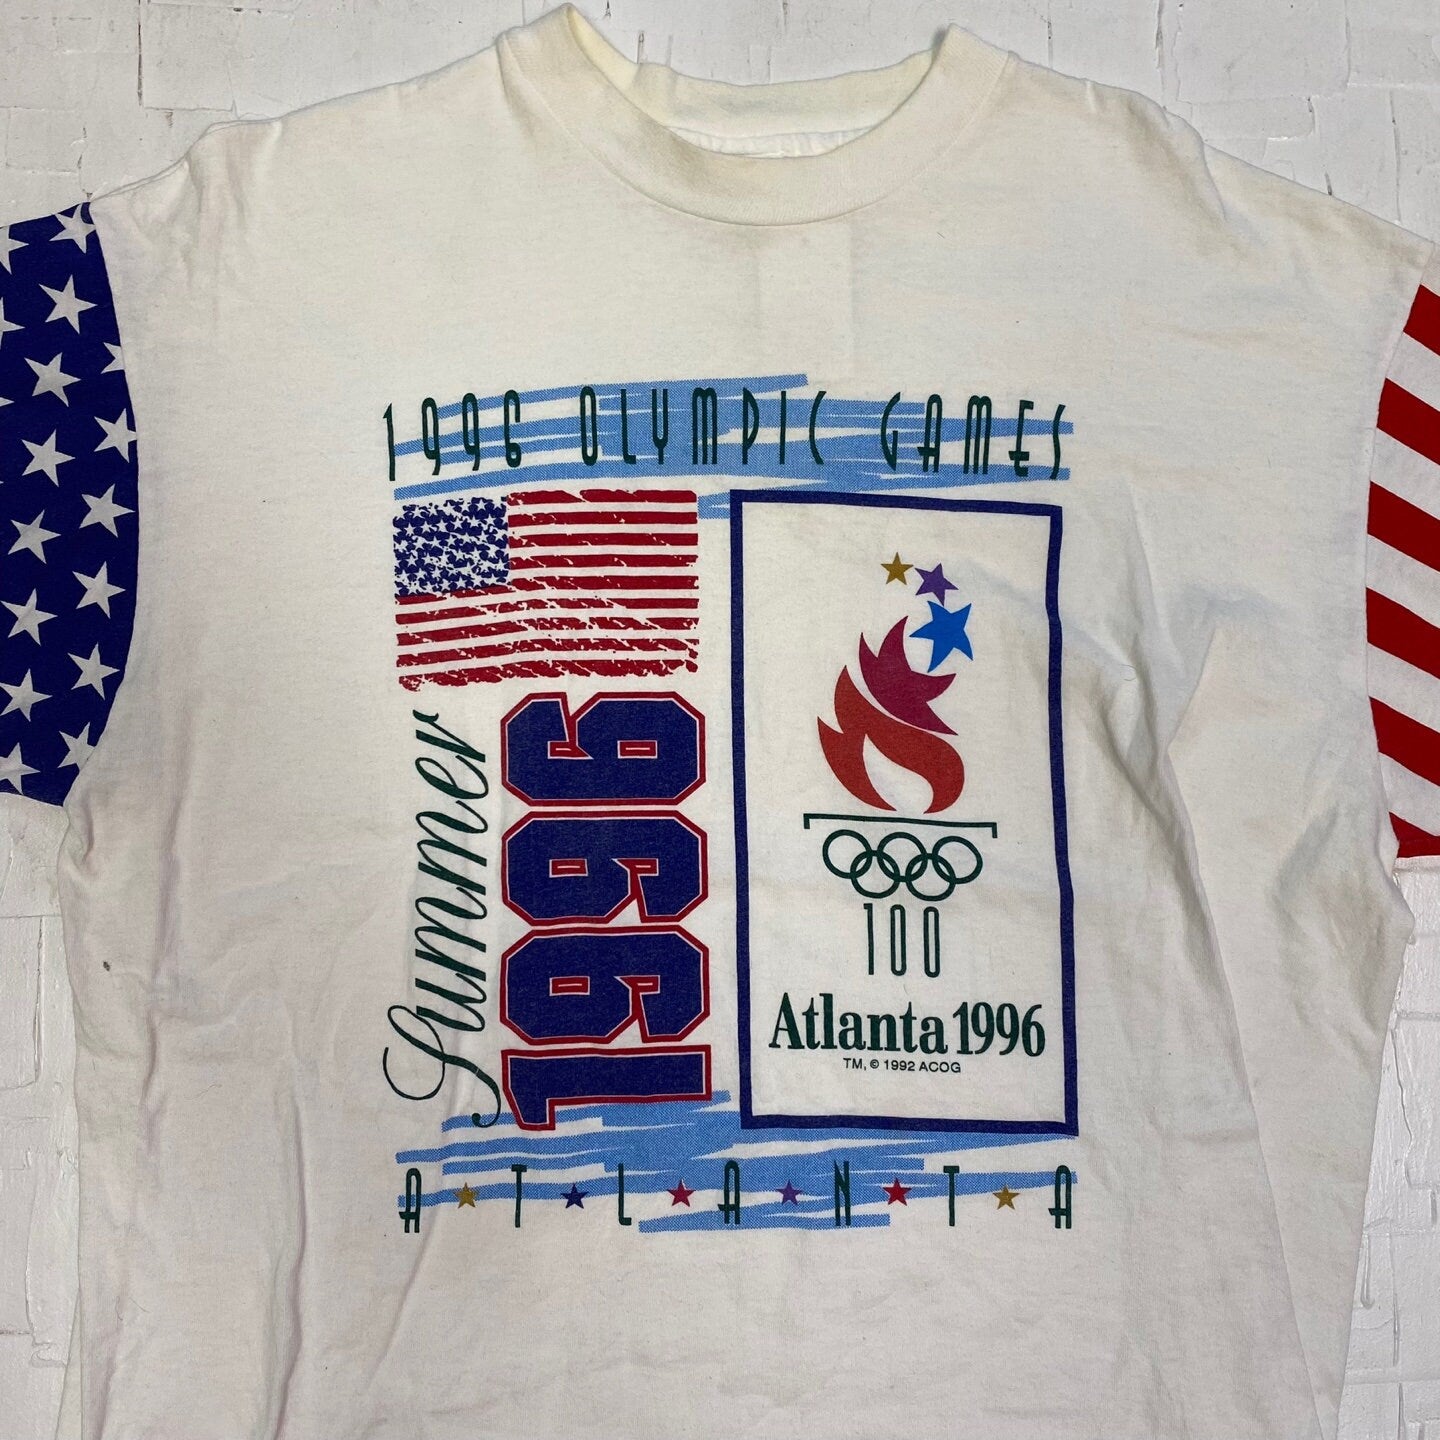 Vintage 1996 Summer Olympic Games Atlanta USA T-shirt | Vintage T-shirt | Stars and Stripes | Centennial Olympic Games | Size  L | M-1994